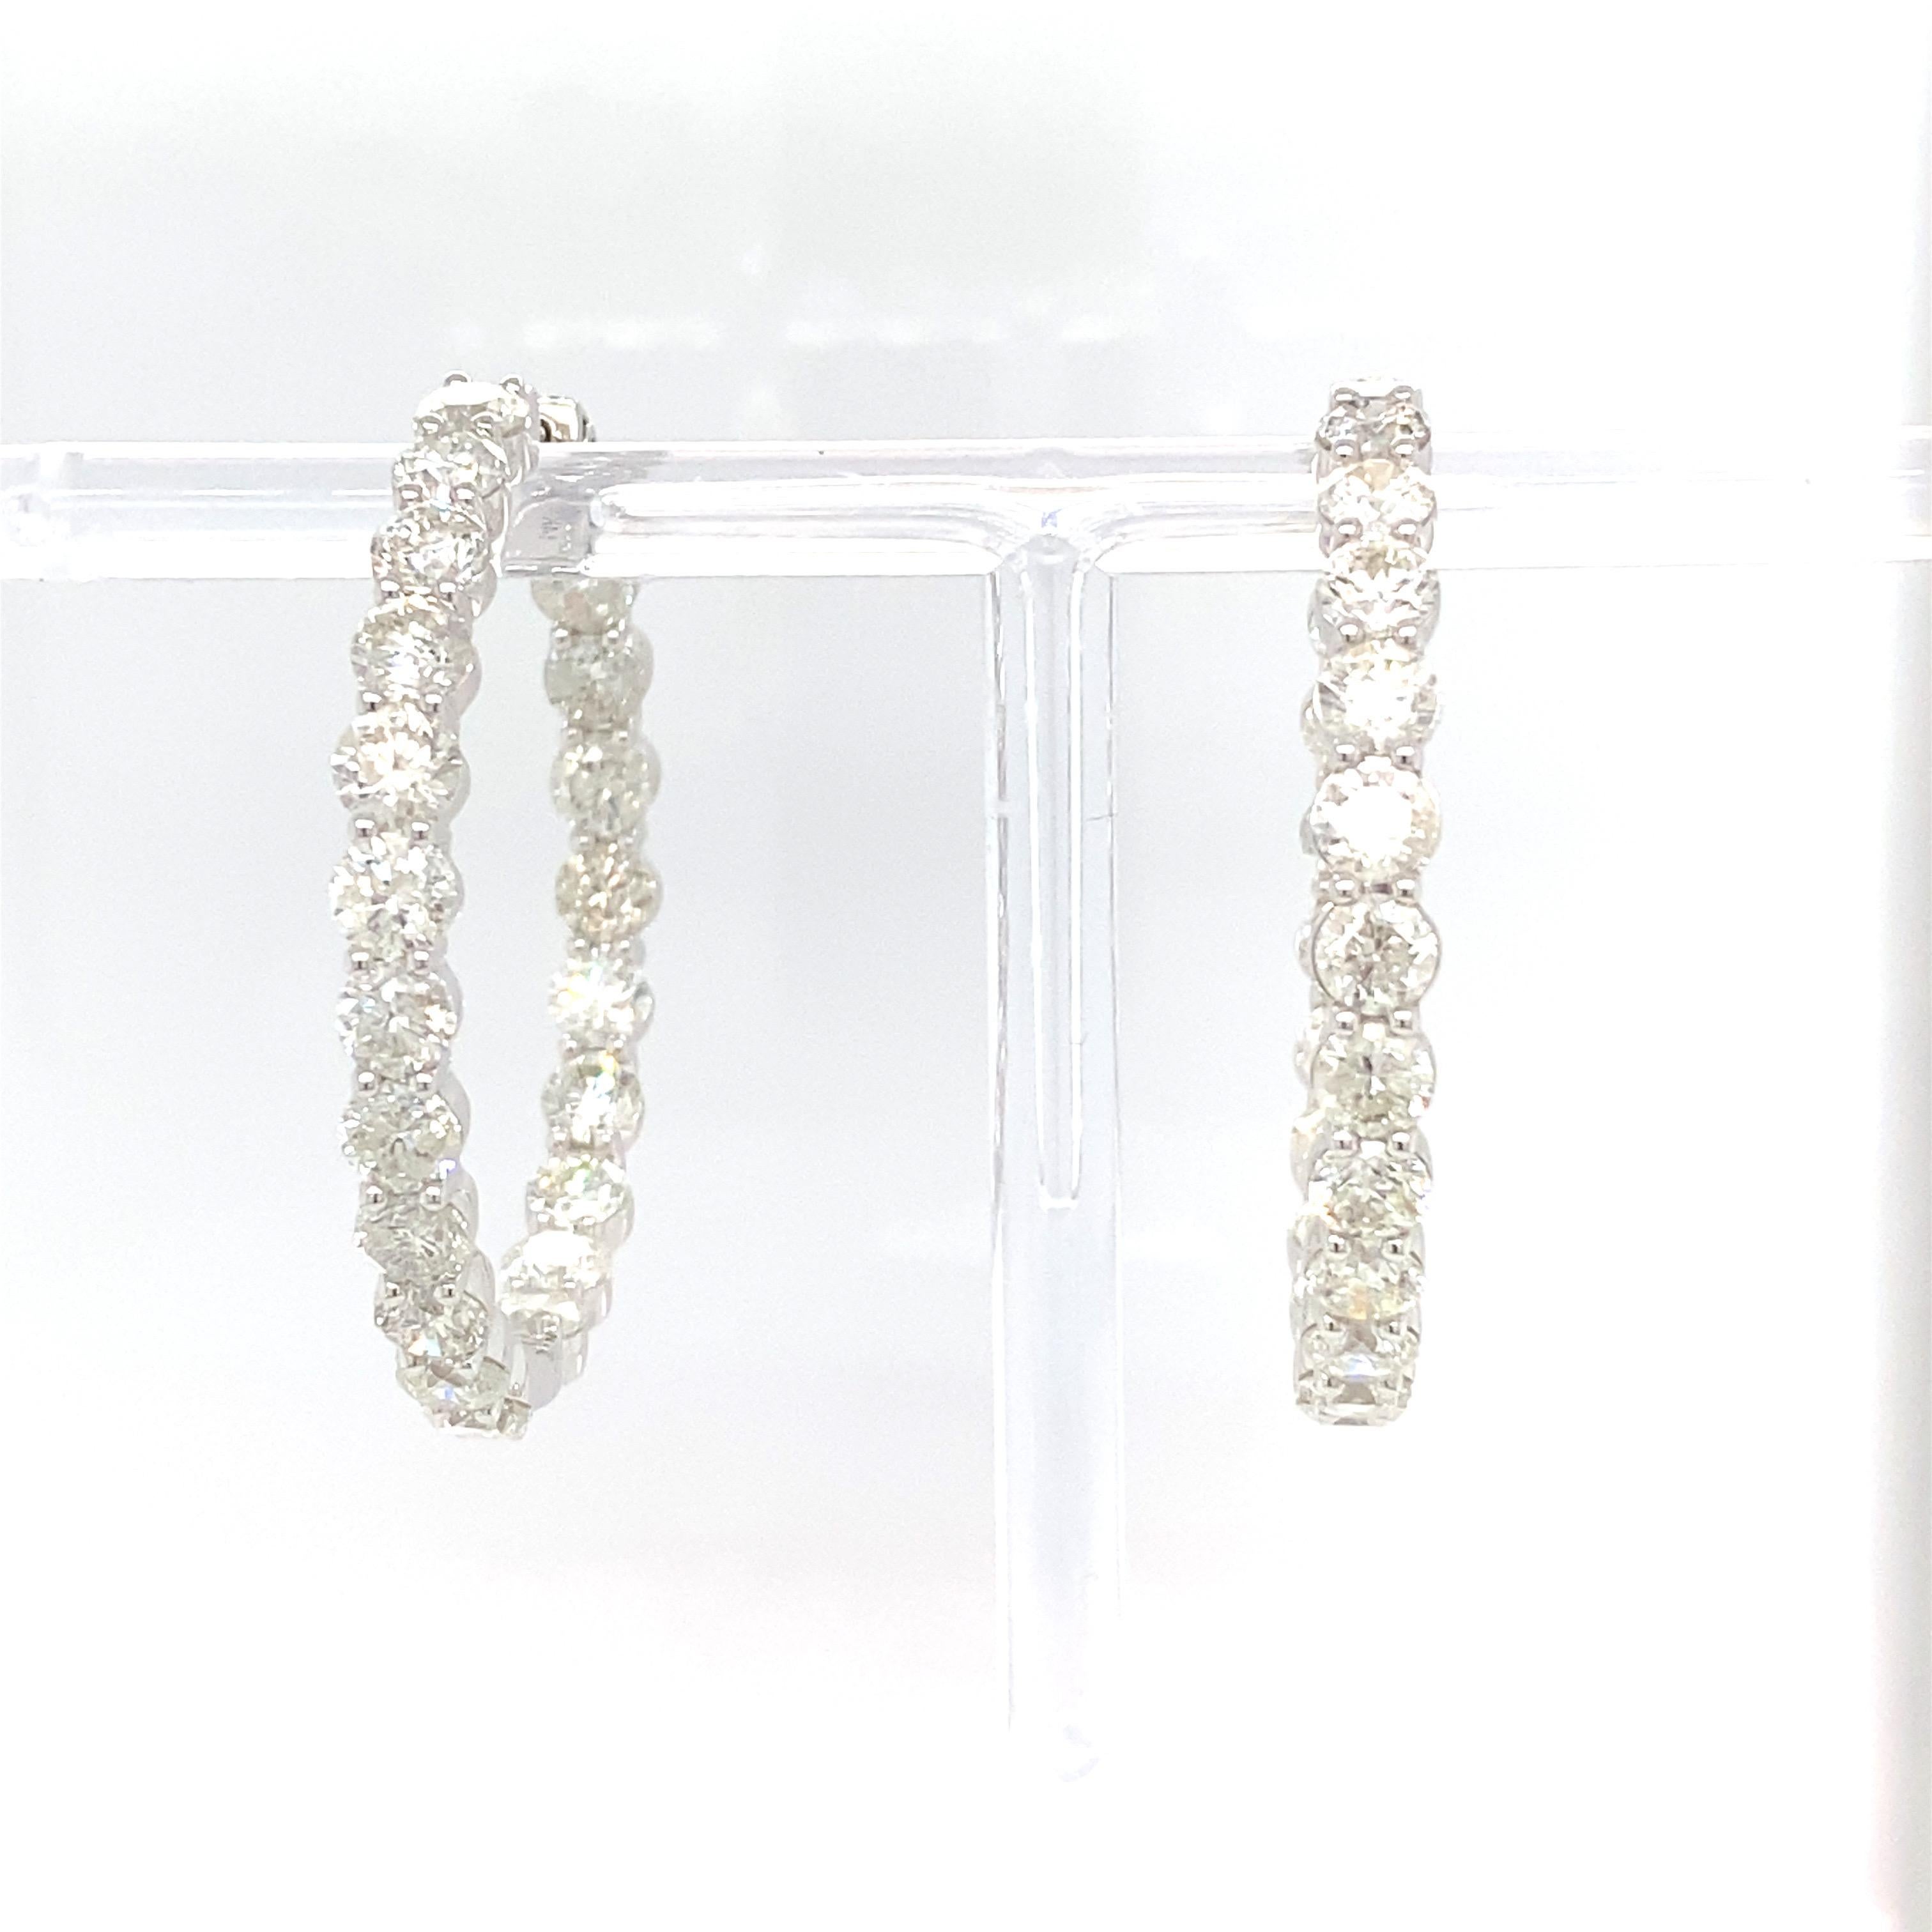 Brilliant cut white diamonds are meticulously crafted to create this timeless elegant inside out hoop earrings. It is set in white gold.
Diamond: 12.88 carat
Gold: 14K White 